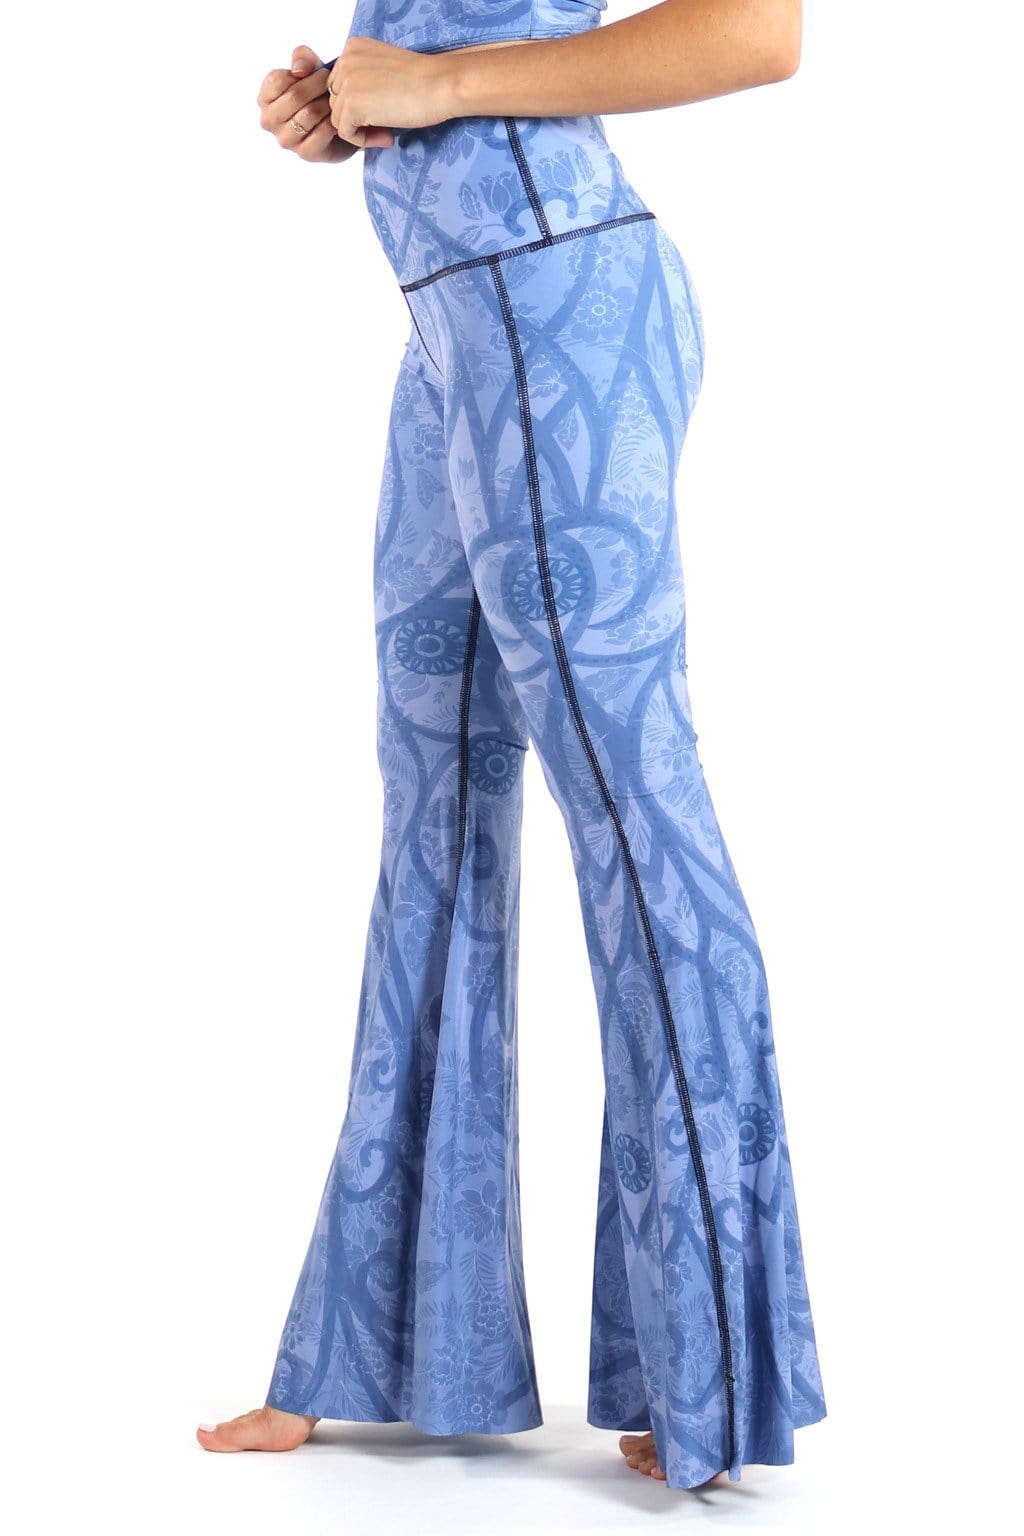 Peaceful Warrior Printed Bell Bottoms Side View